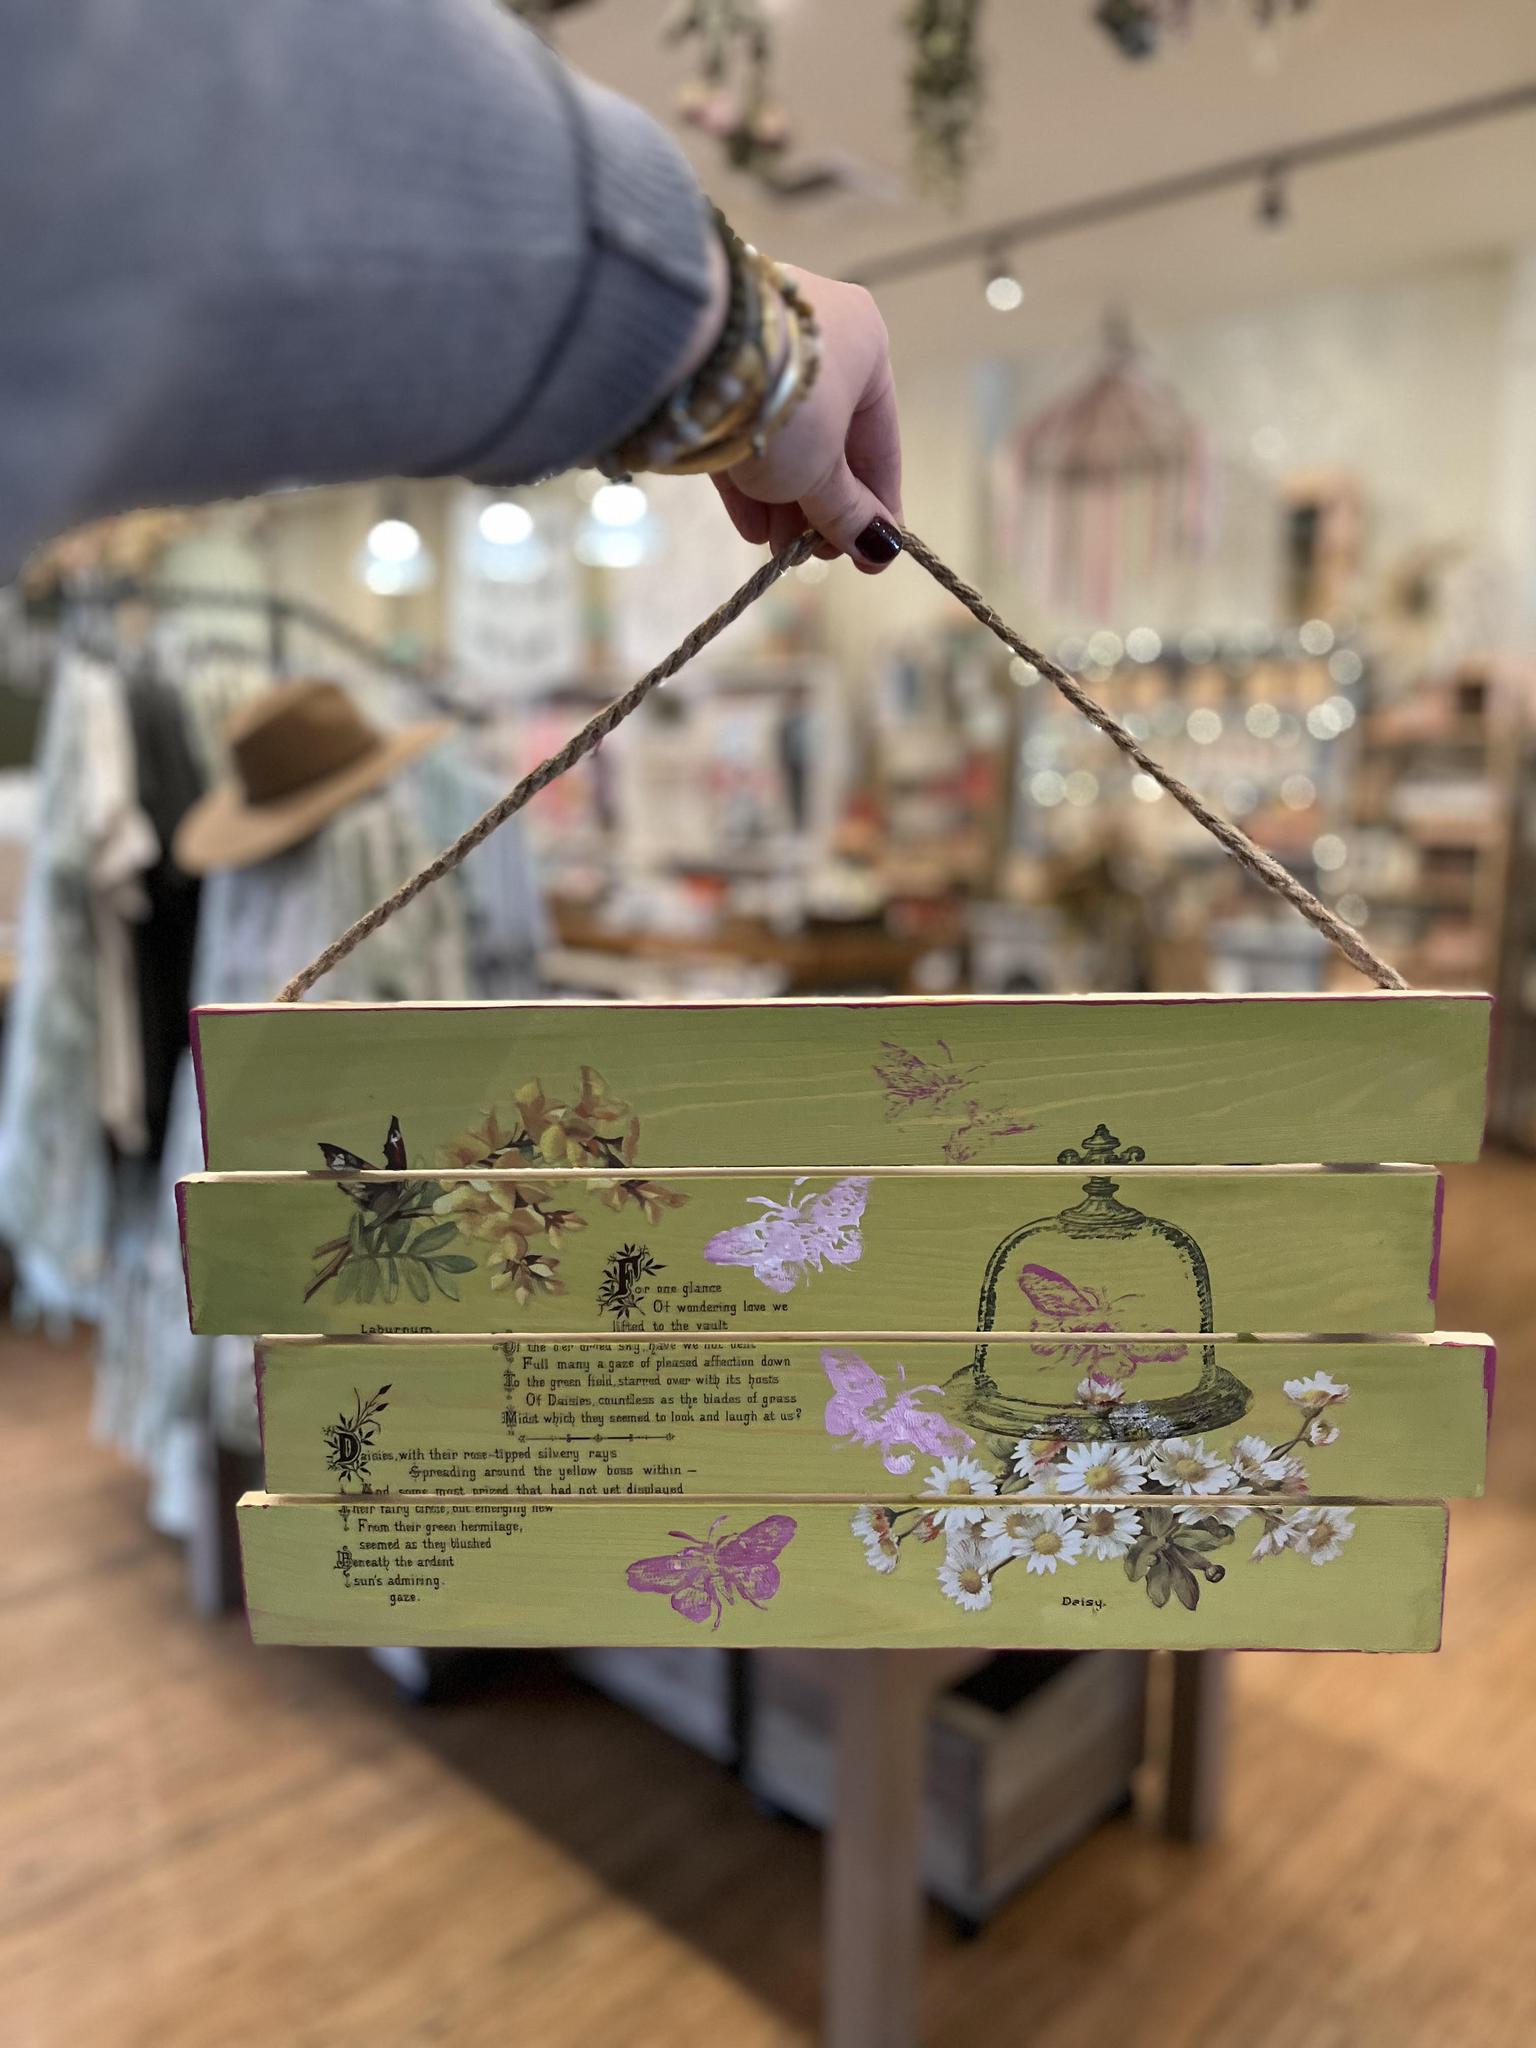 The Owl Box Lover of Flowers Sign Workshop July 13th  1pm-3pm